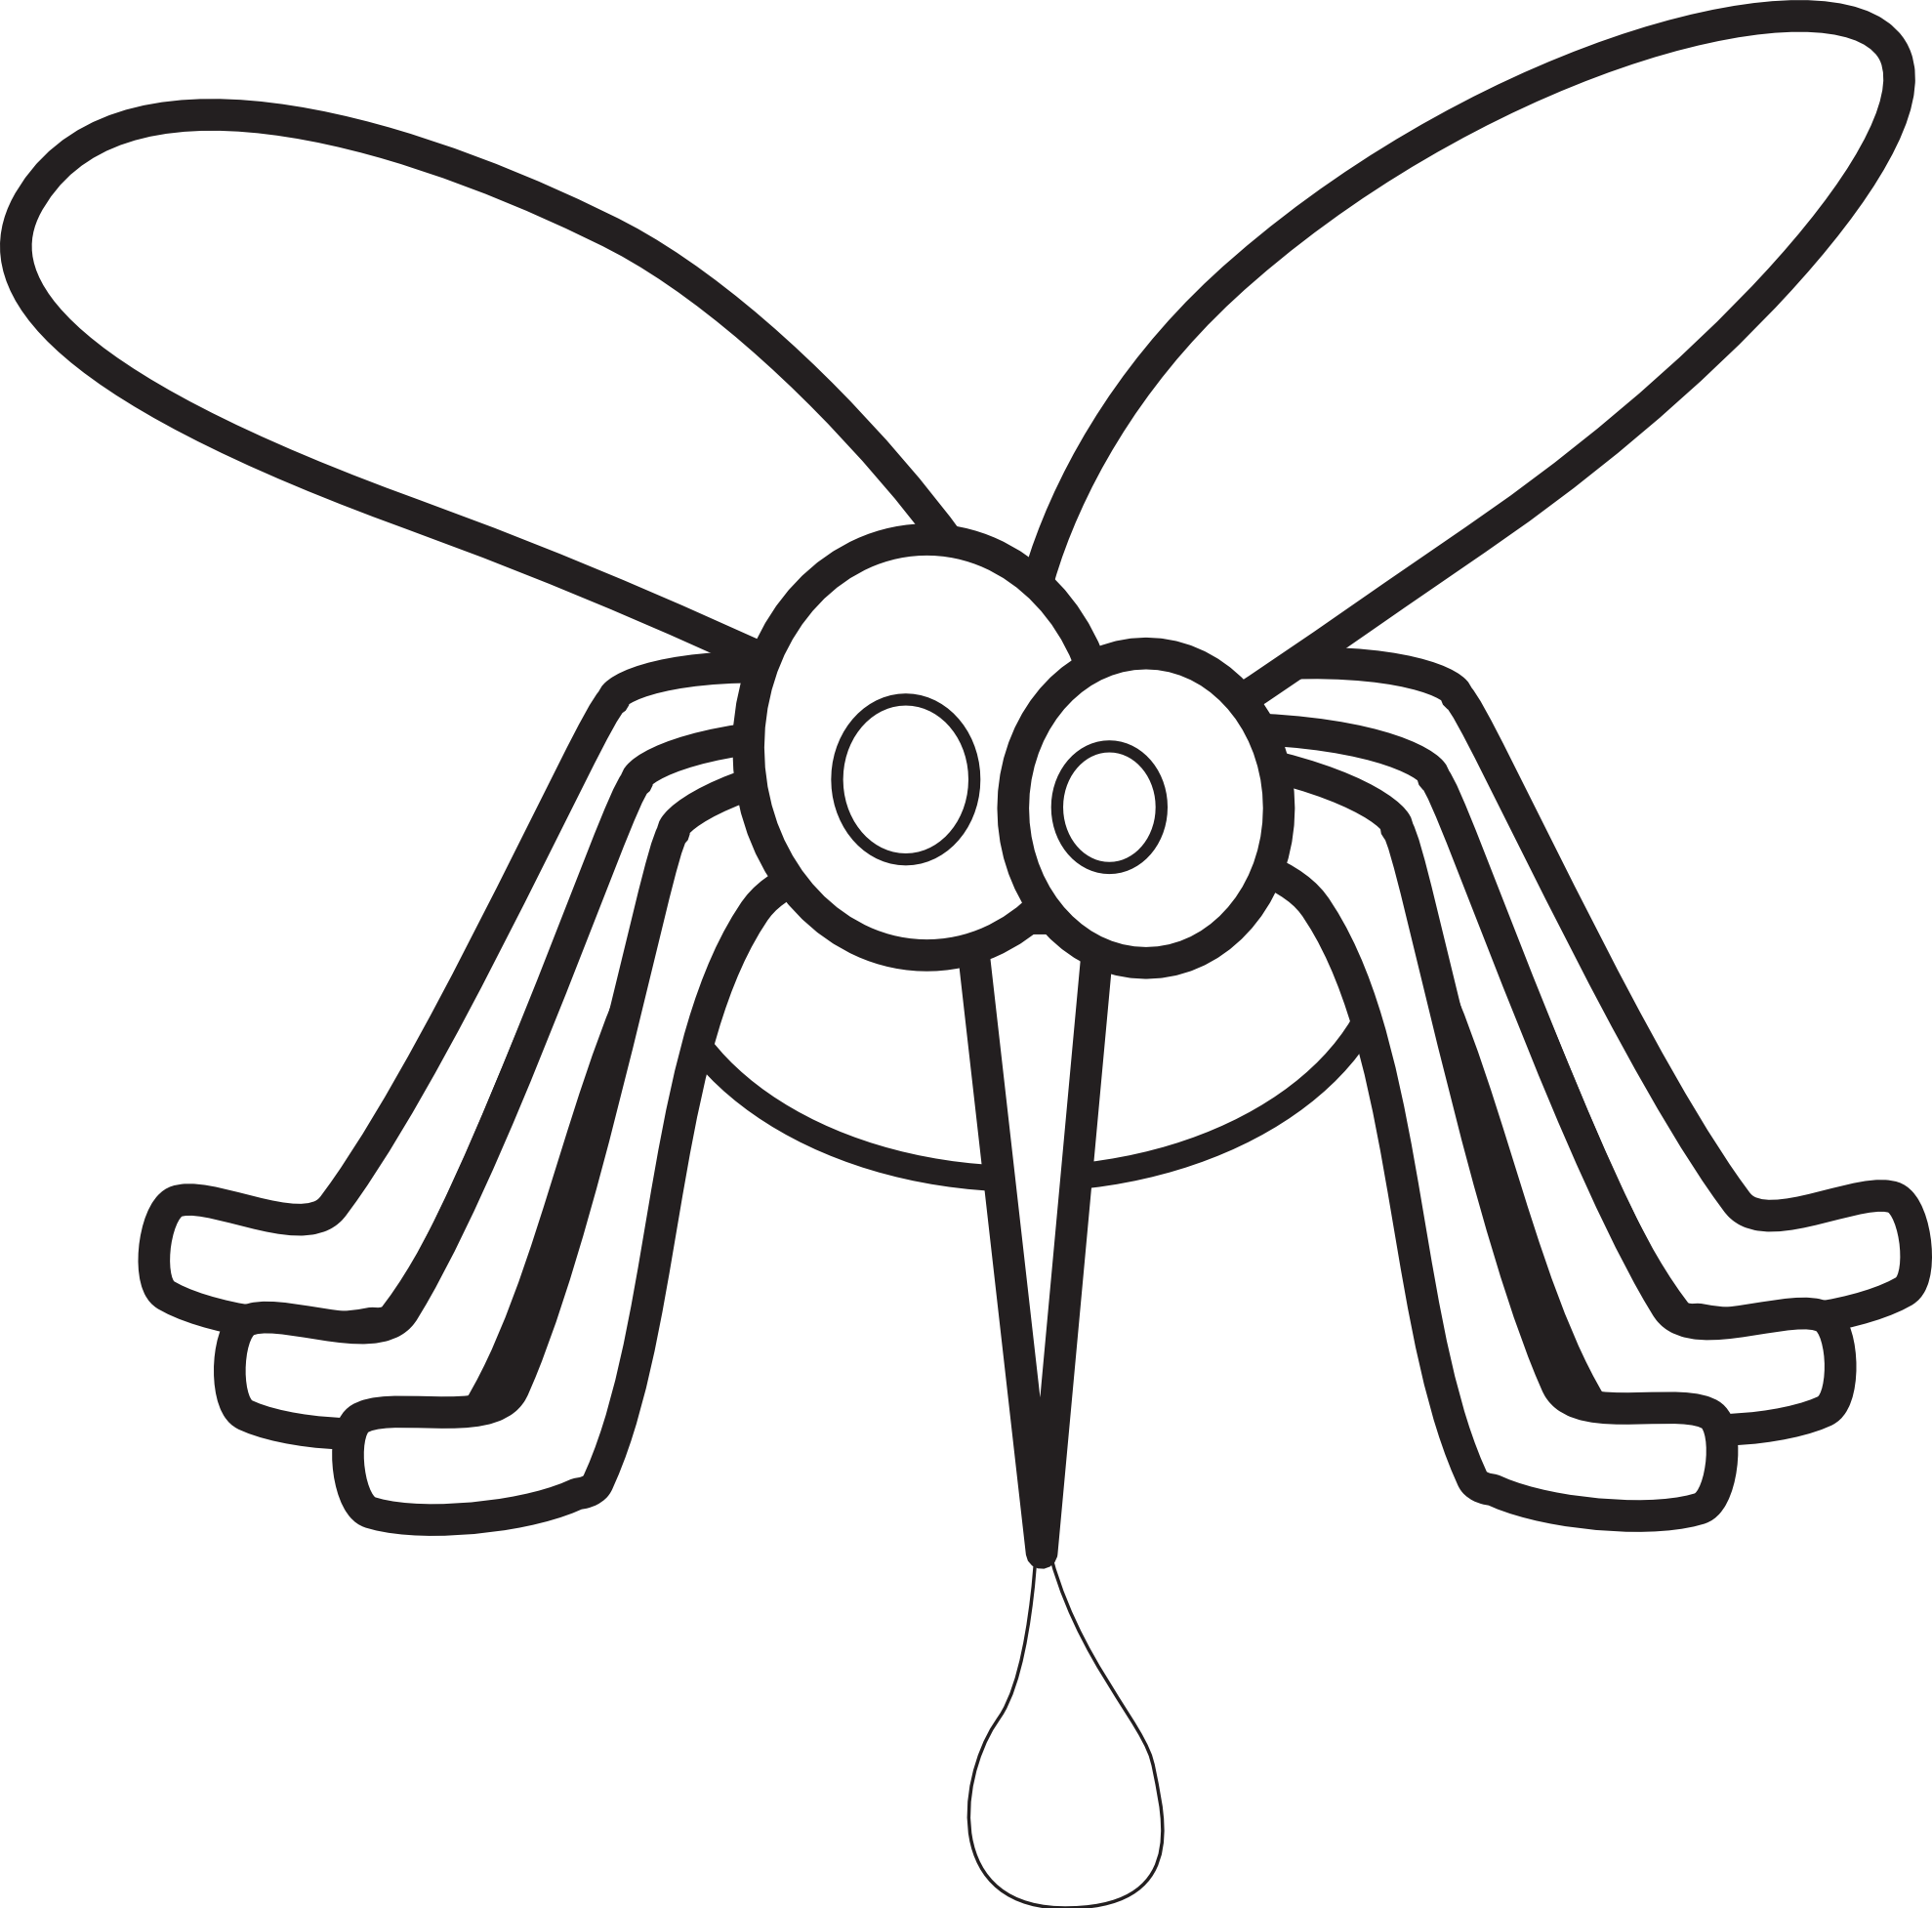 Mosquito clipart outline. Free download best on